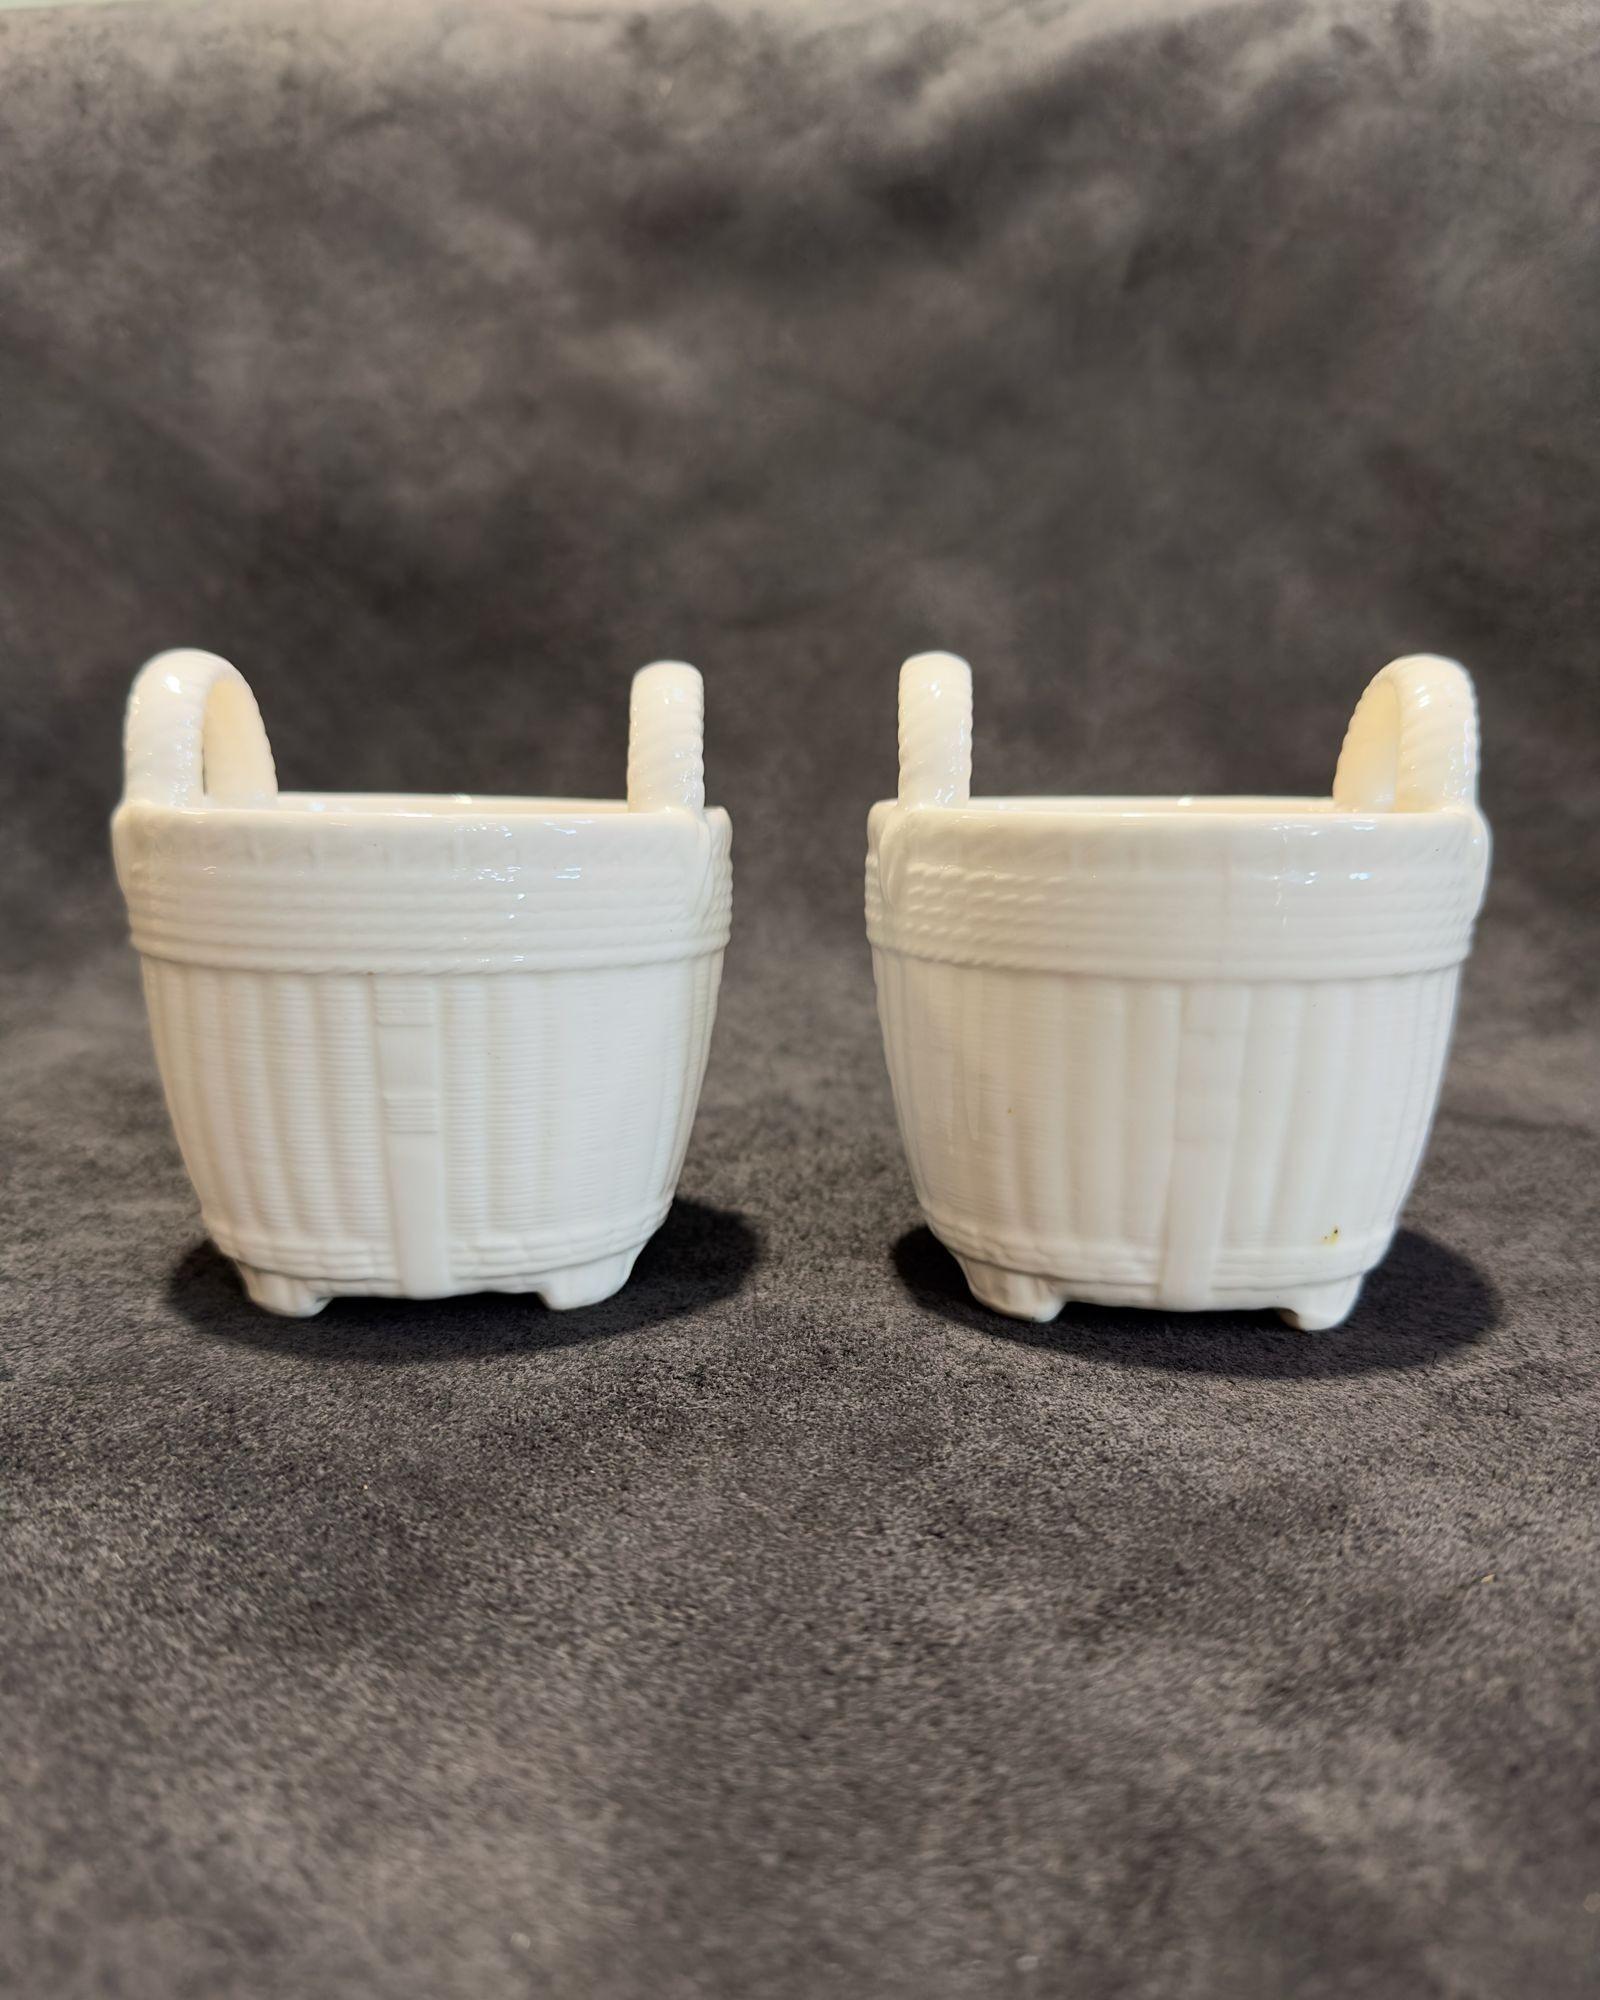 Pair Vintage Tiffany & Co. Ceramic Weaved Baskets, 1960.
Creamy white ceramic footed baskets made by Tiffany & Co. stamped on bottom in blue.
Measure 4.5